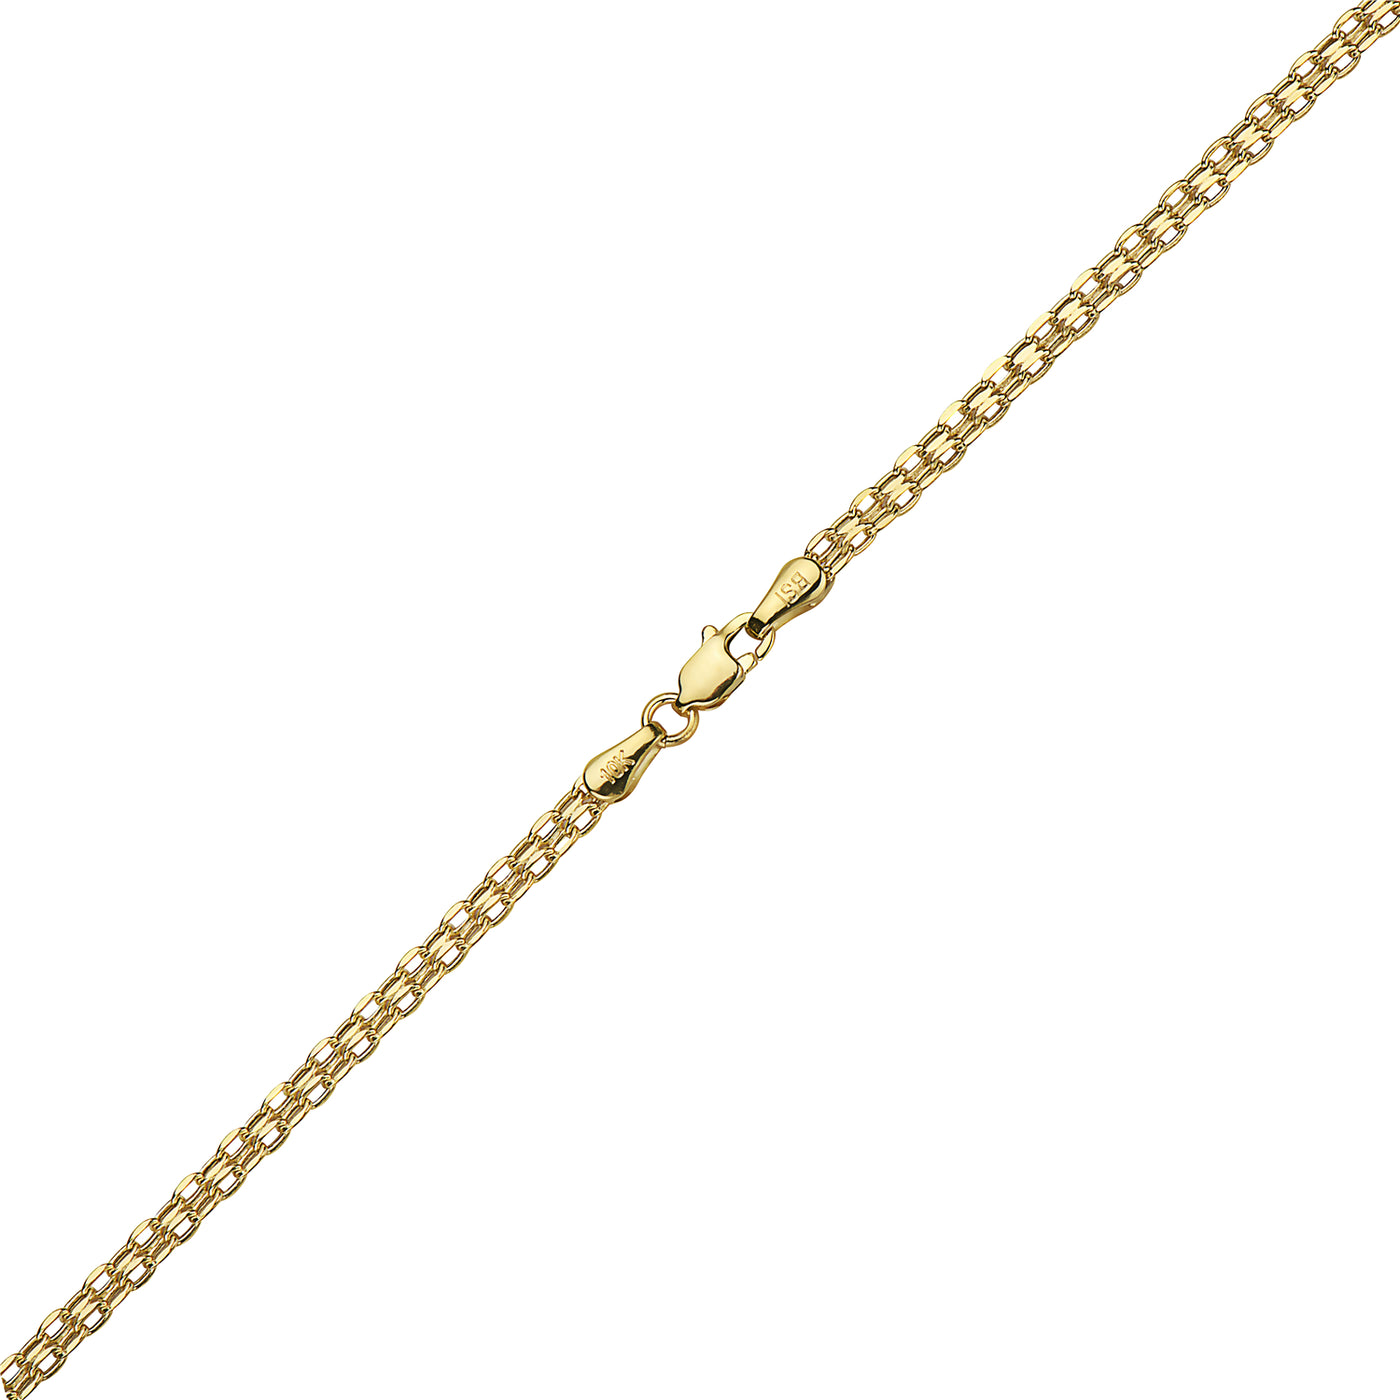 10K Gold Thick Bismarck Chain Necklace